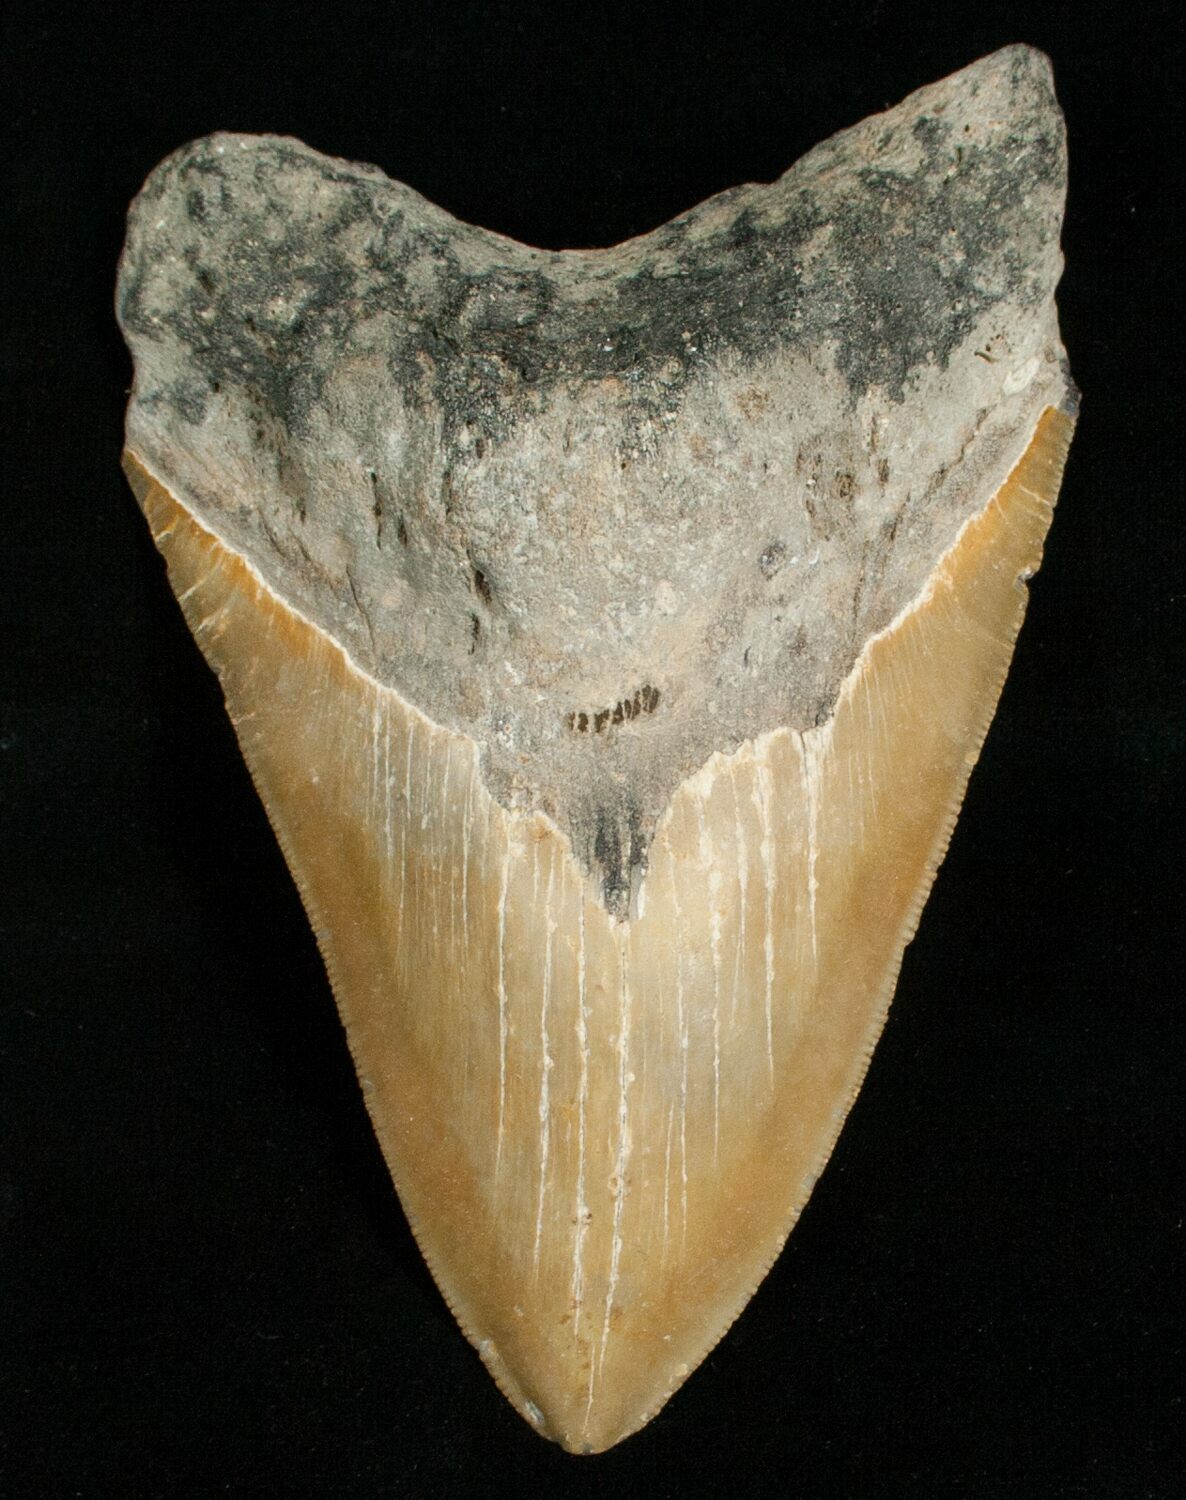 Large 5.37 Inch Megalodon Tooth For Sale (#5003) - FossilEra.com